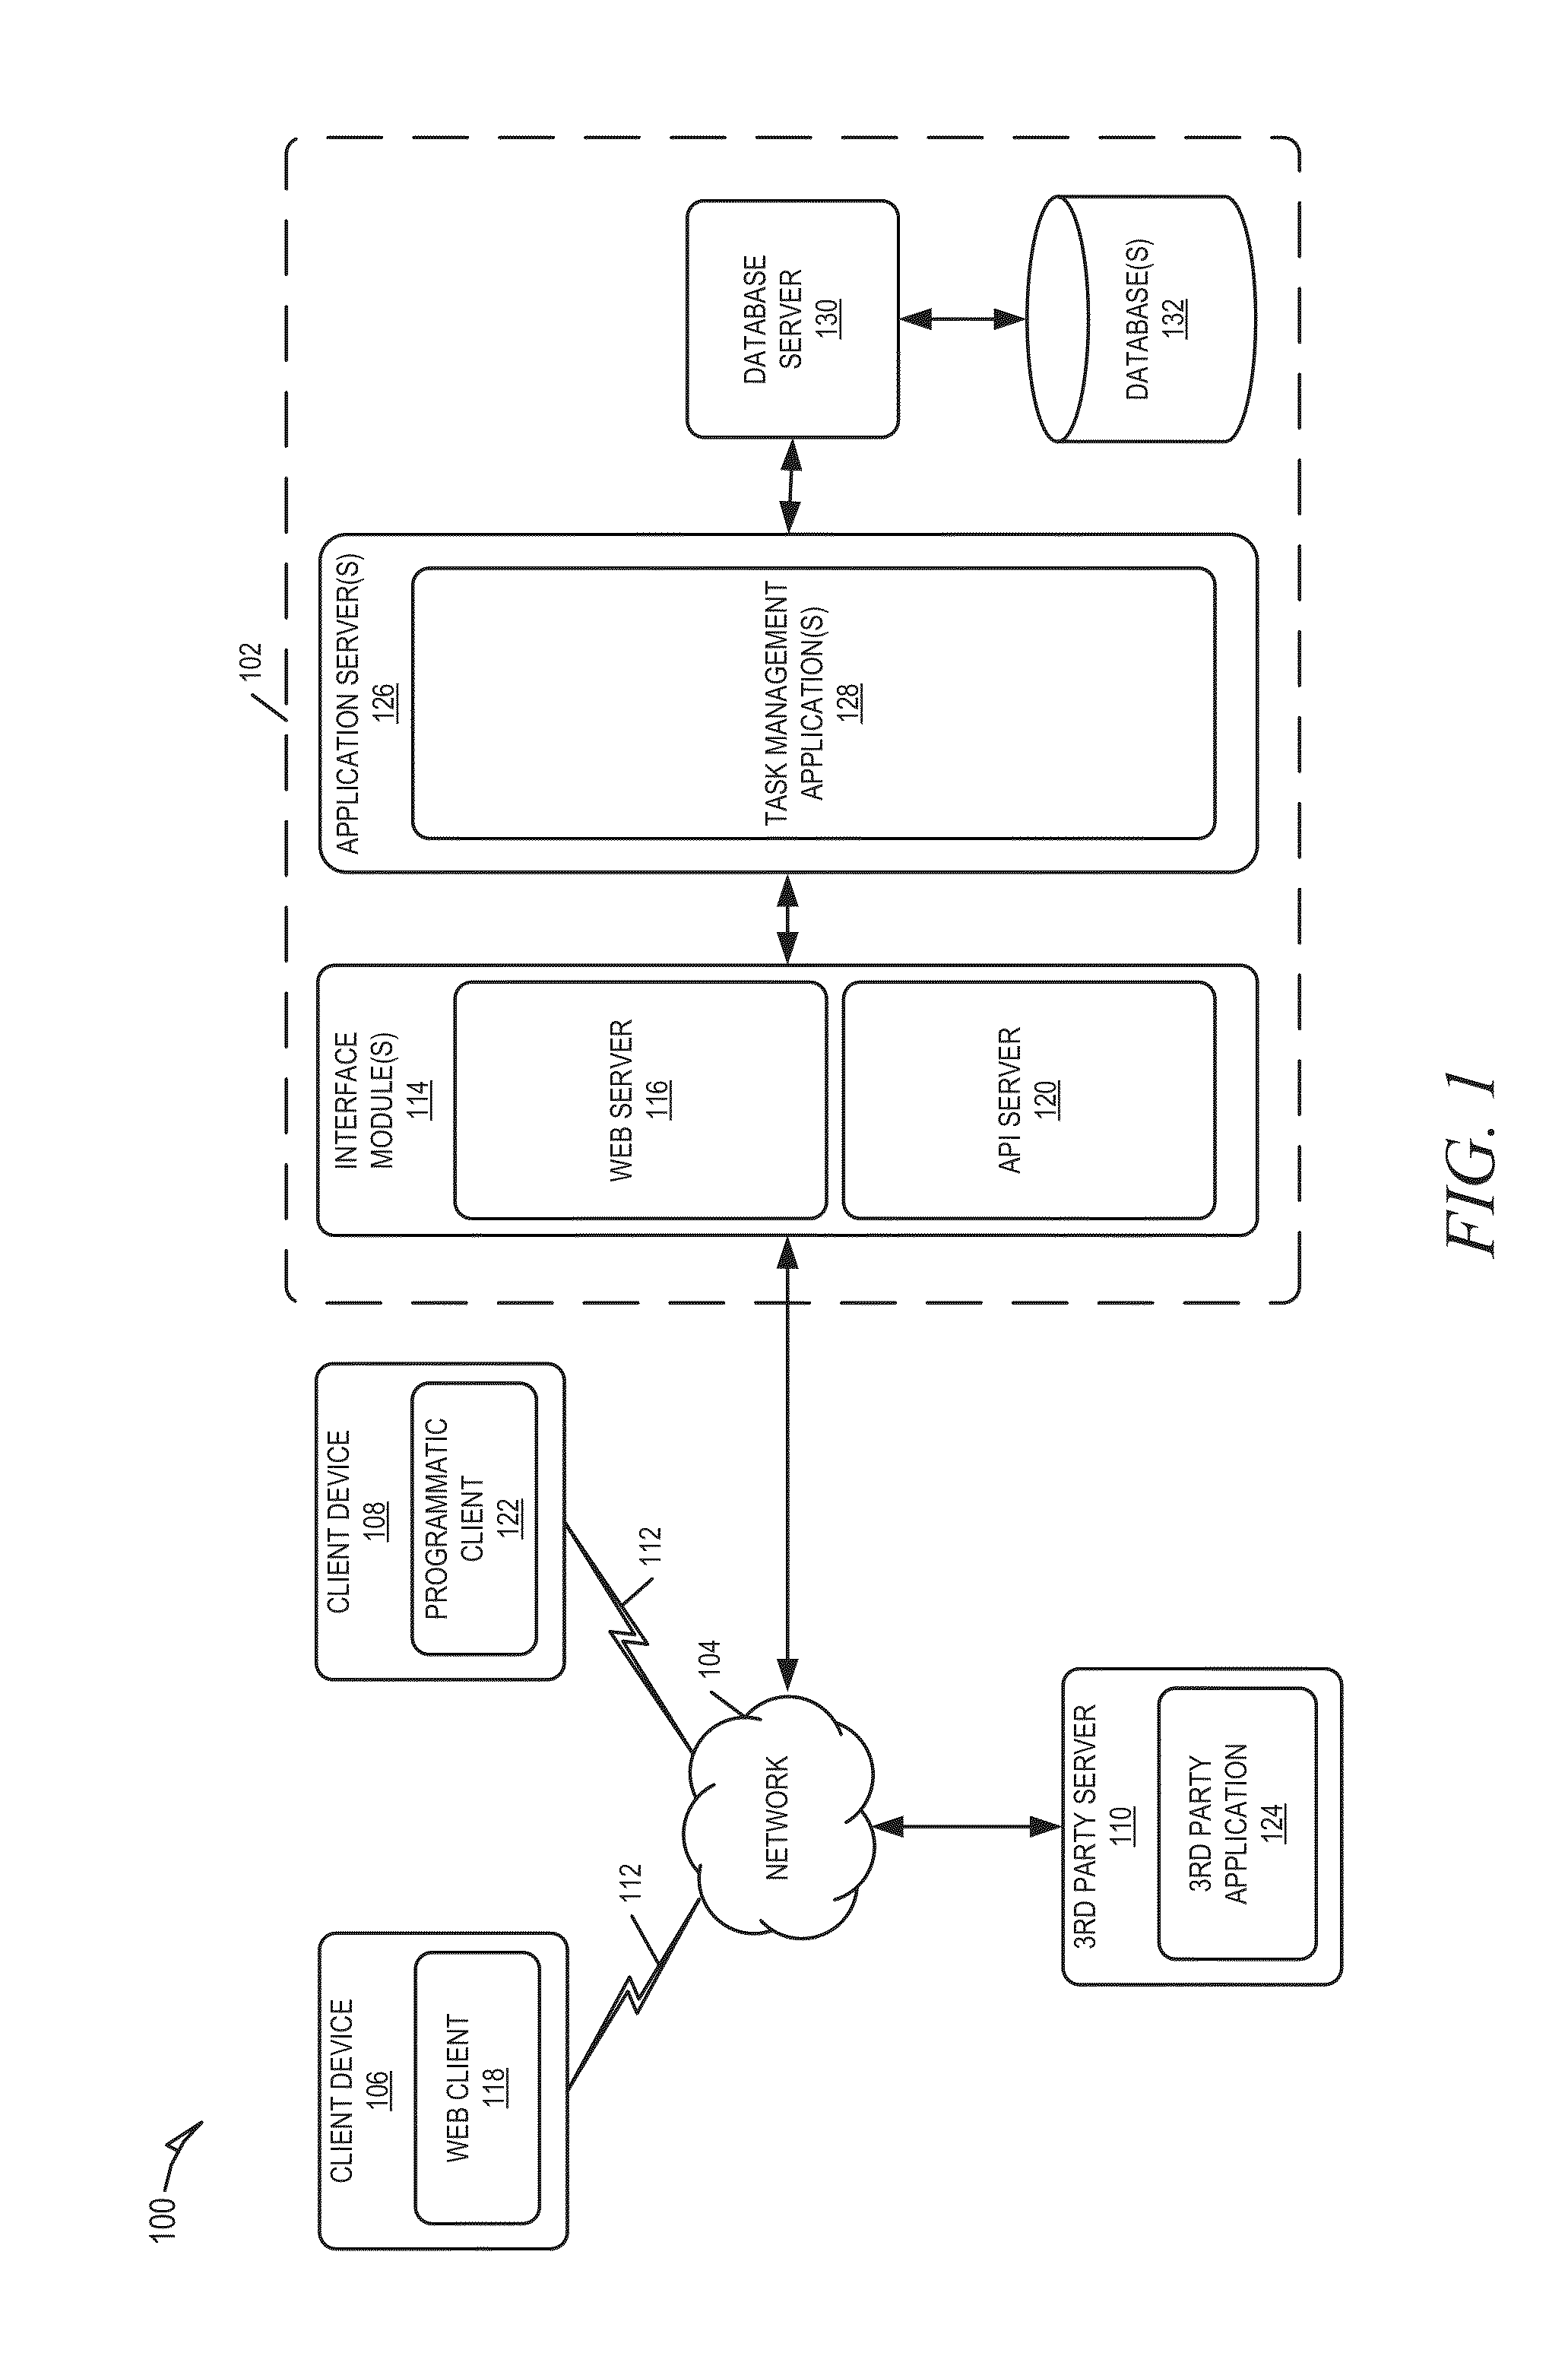 System and method for activity management presentation